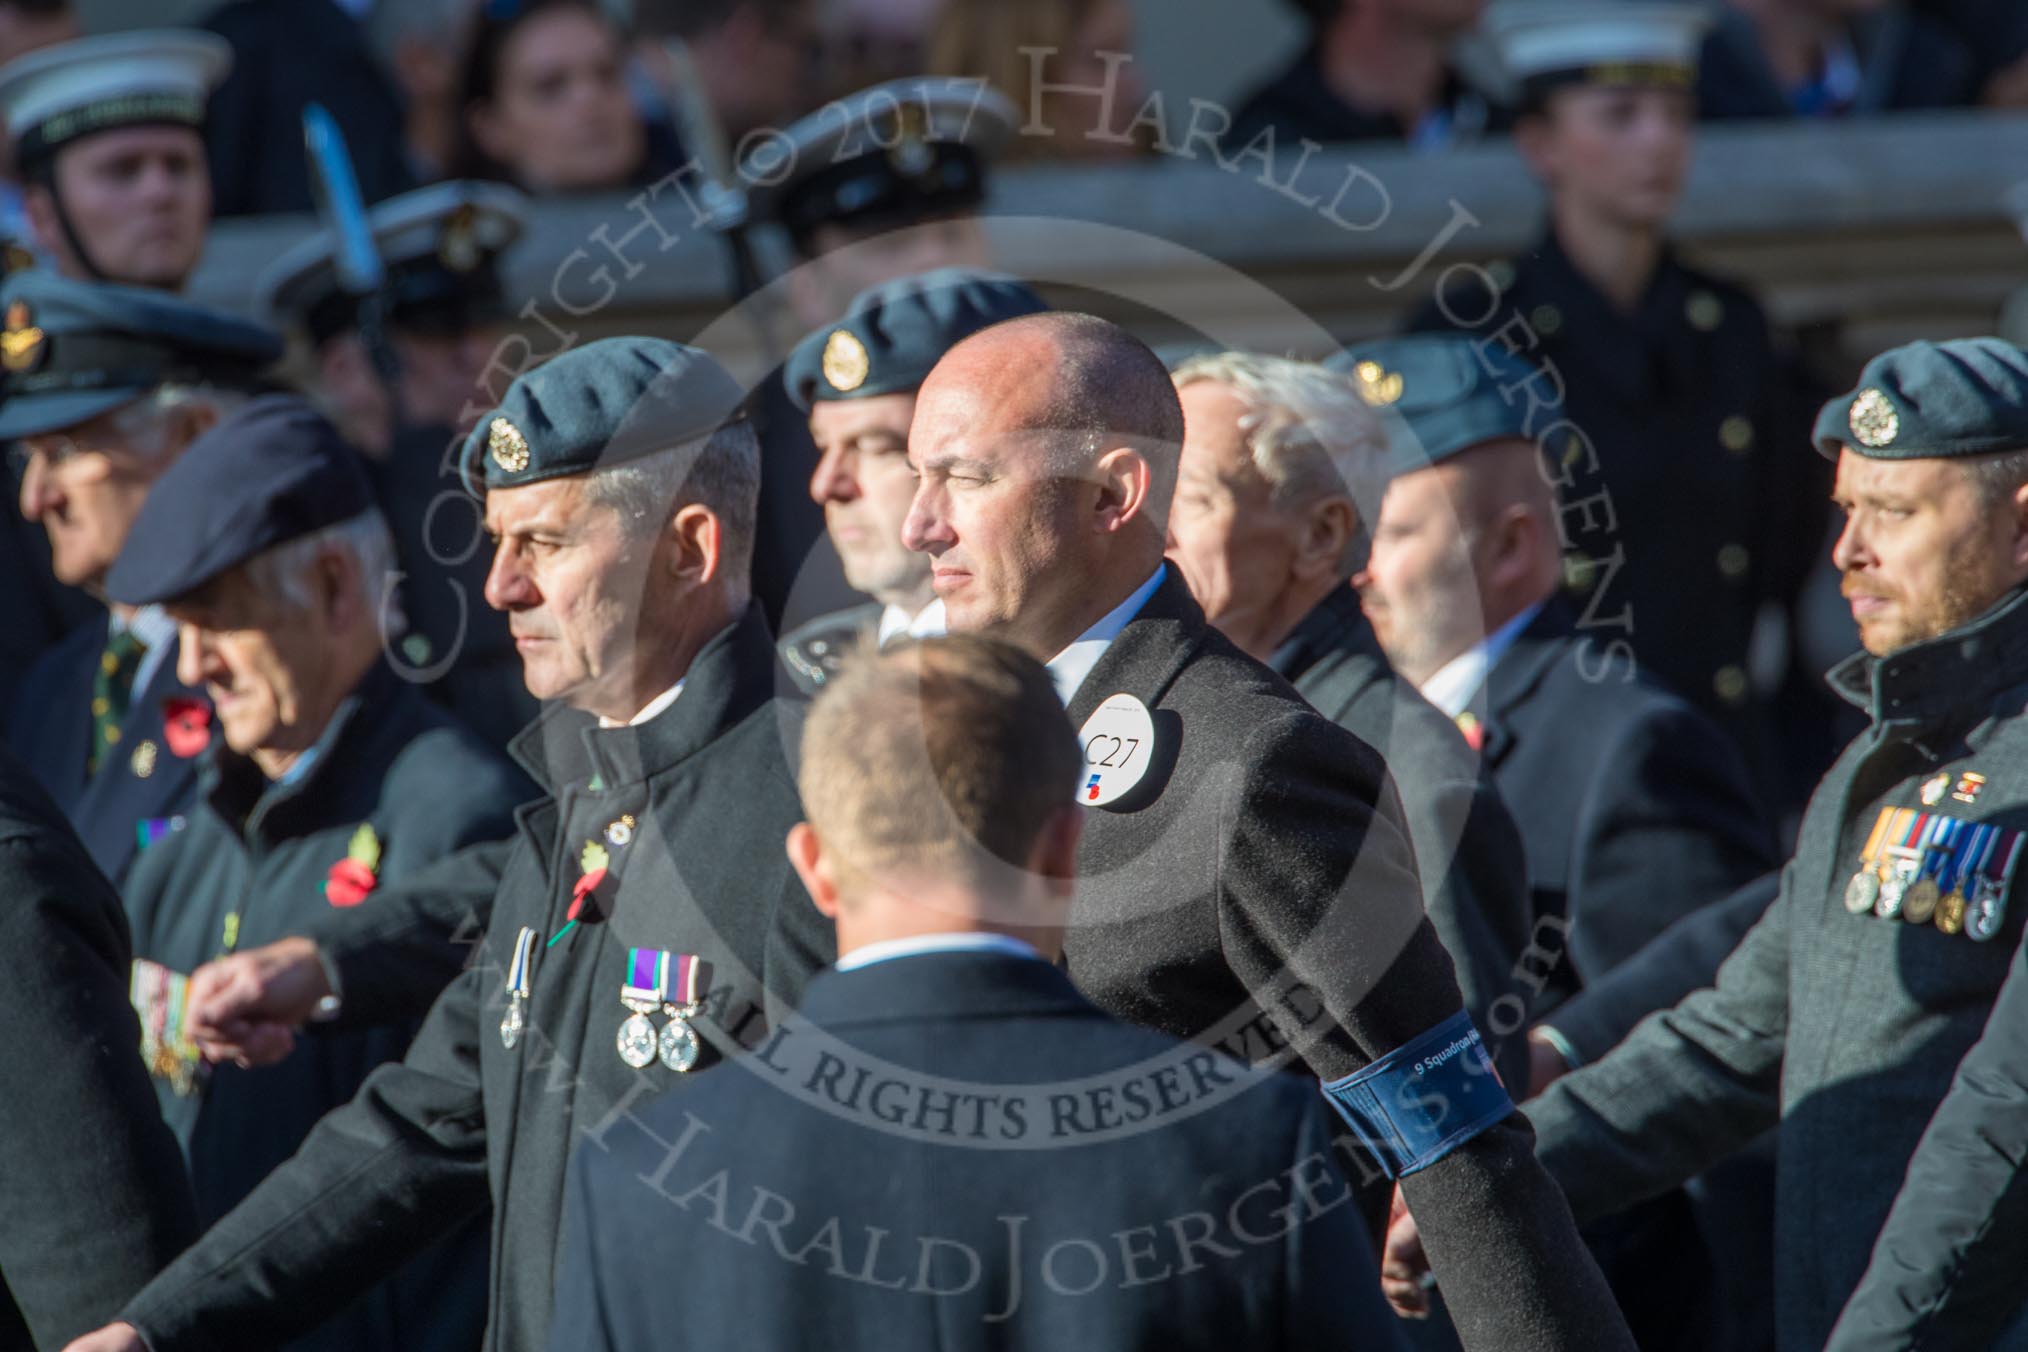 The 9 Squadron Association RAF (Group C27, 21 members) during the Royal British Legion March Past on Remembrance Sunday at the Cenotaph, Whitehall, Westminster, London, 11 November 2018, 12:19.